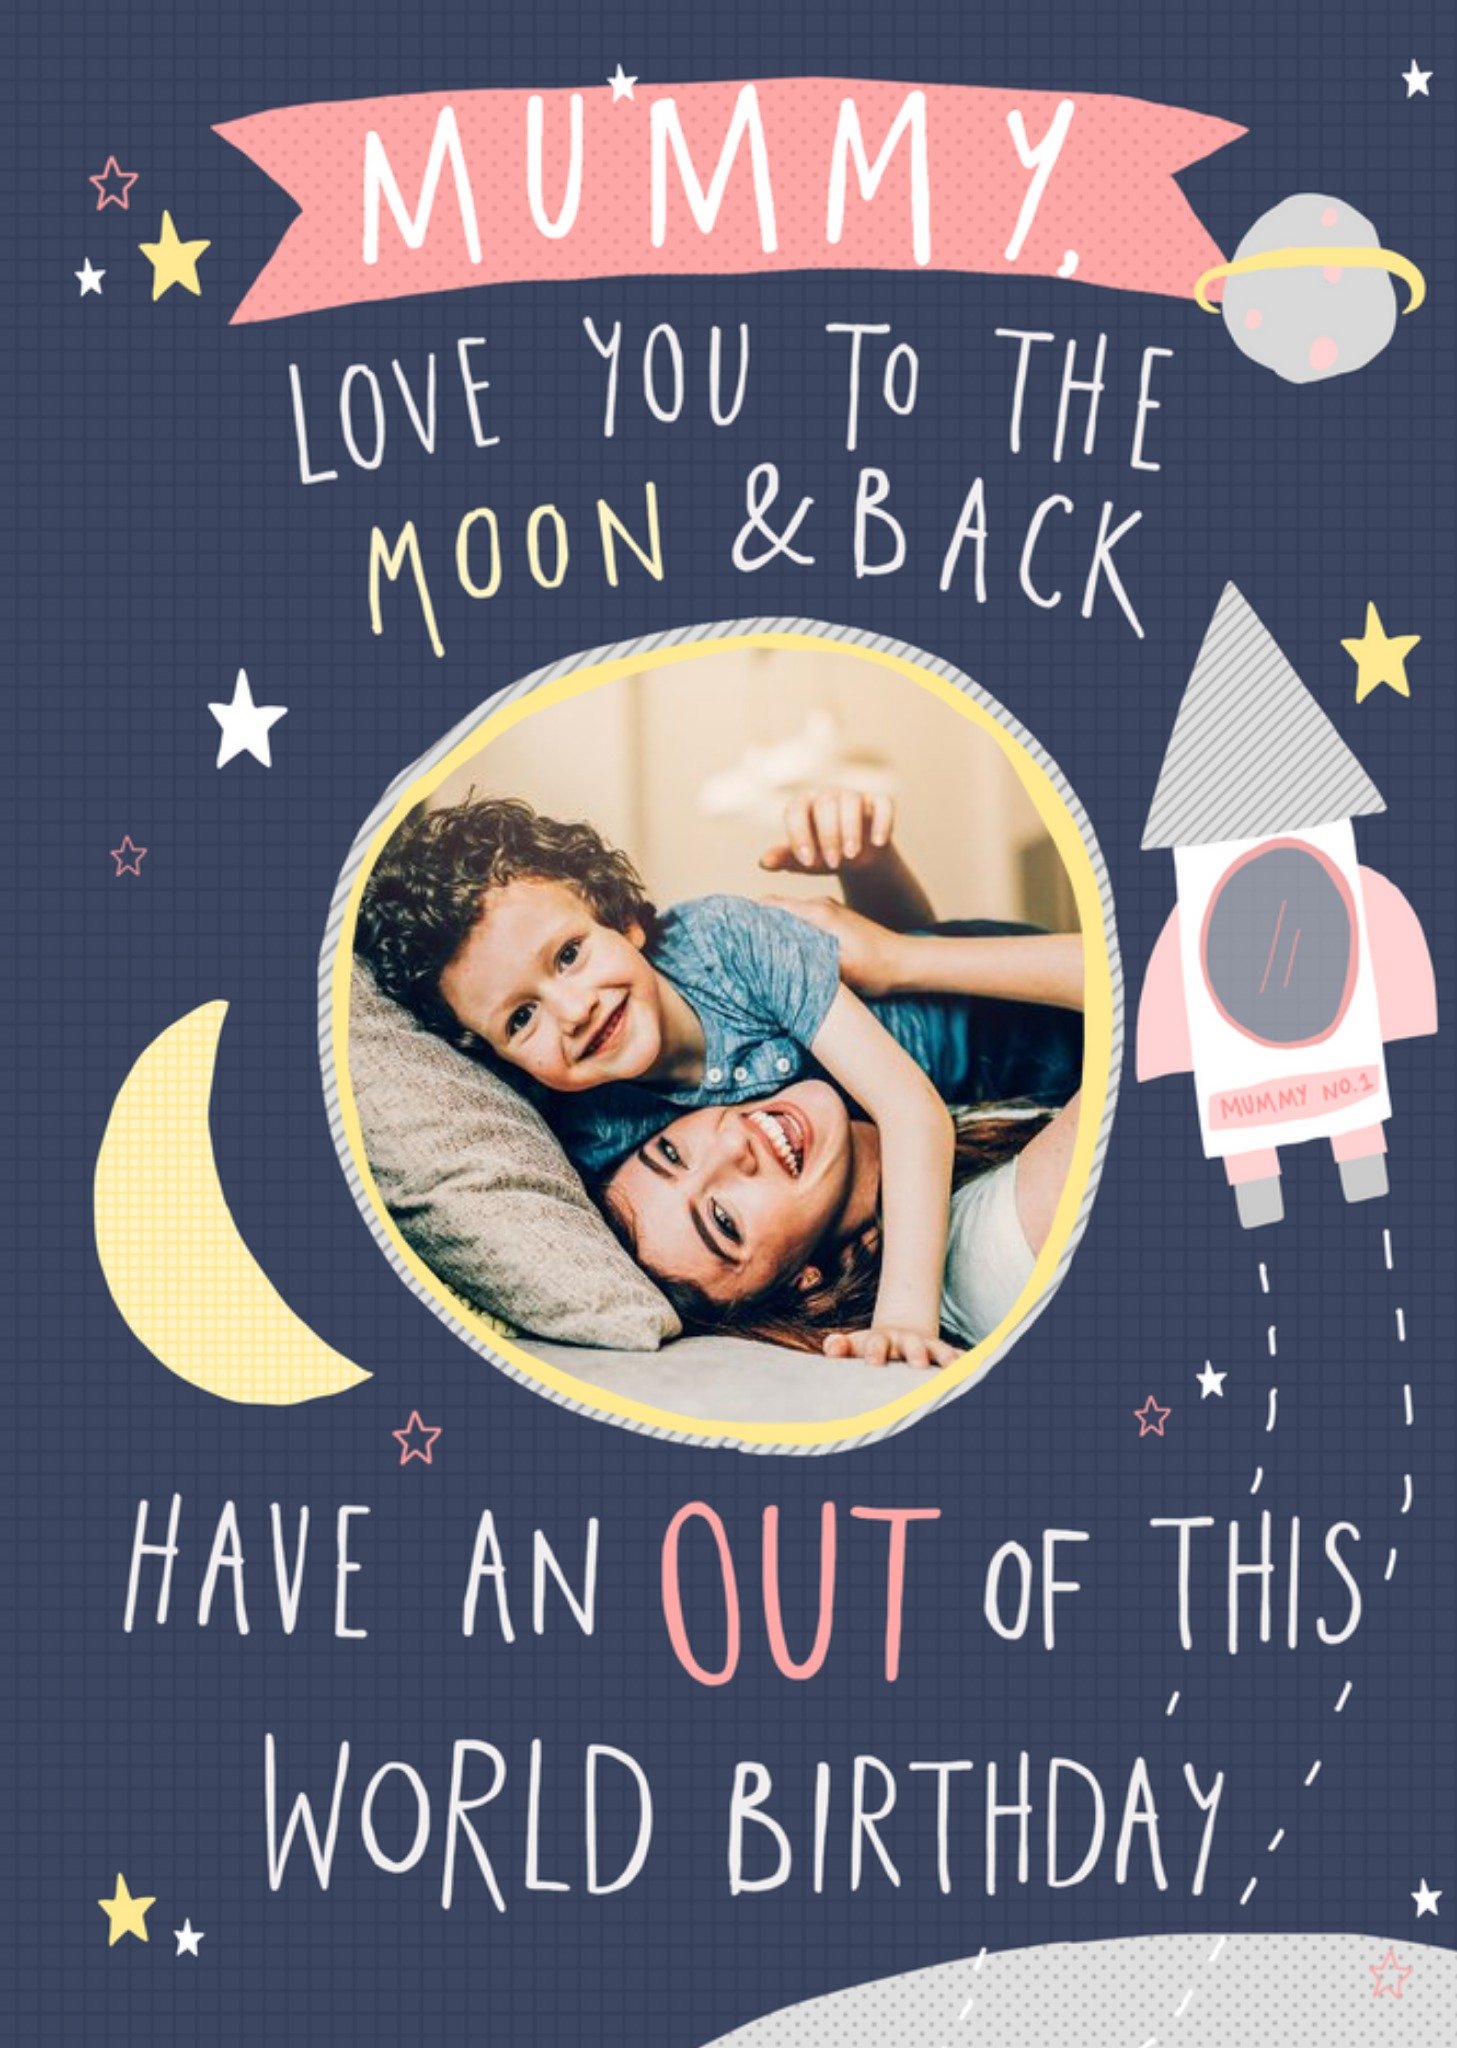 Moonpig Birthday Card - Mummy - Moon And Back - Out Of This World - Photo Upload Card, Large